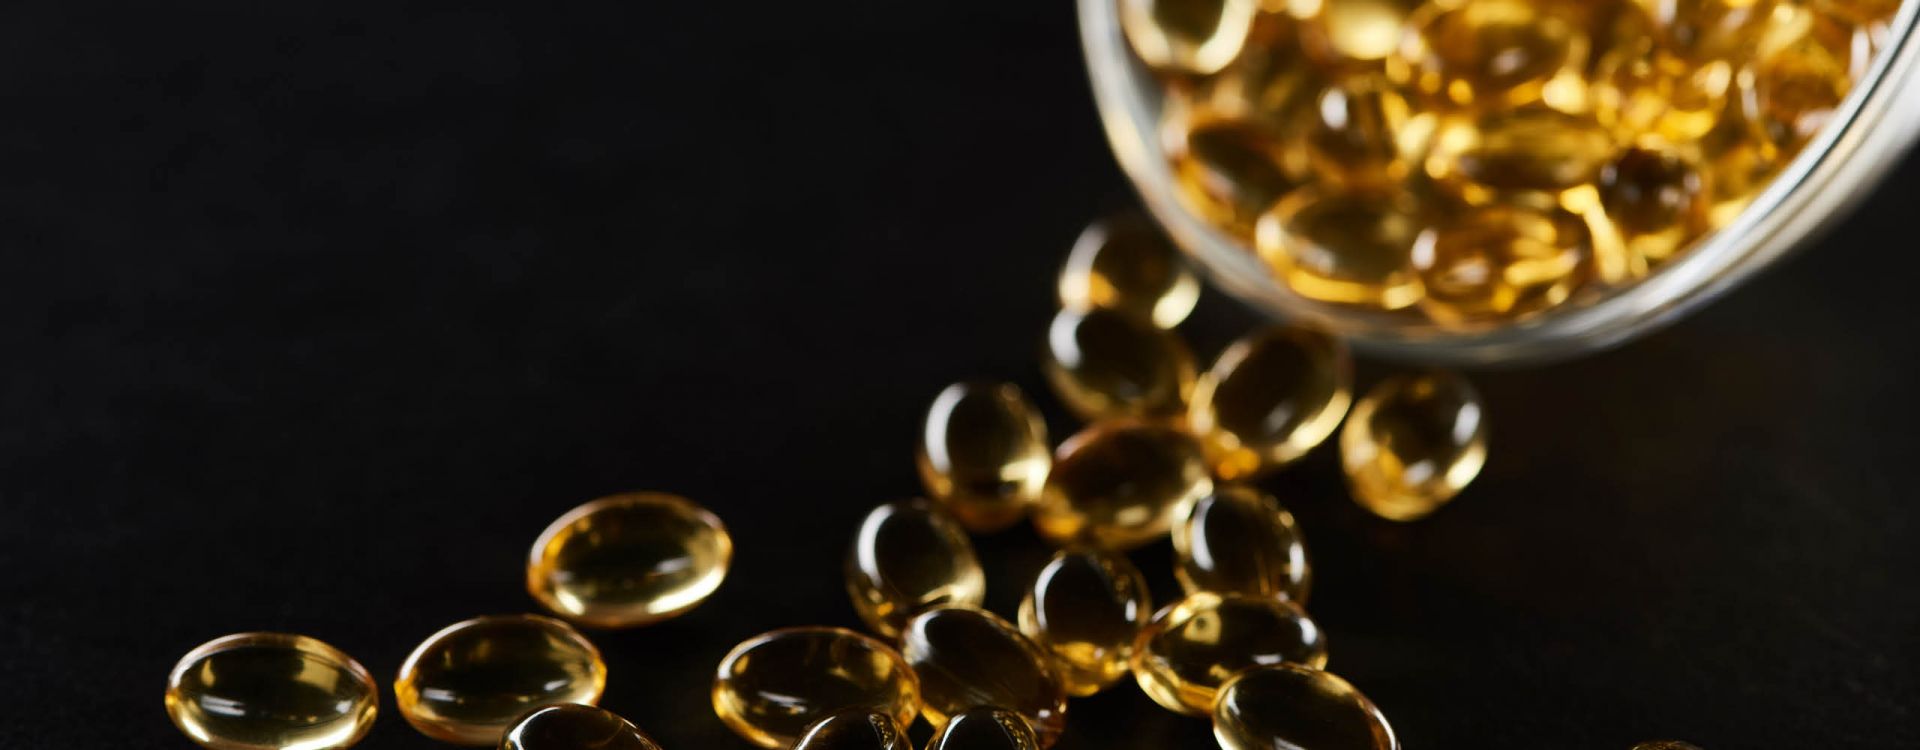 Fish Oil During Pregnancy: What You Need To Know Article Image